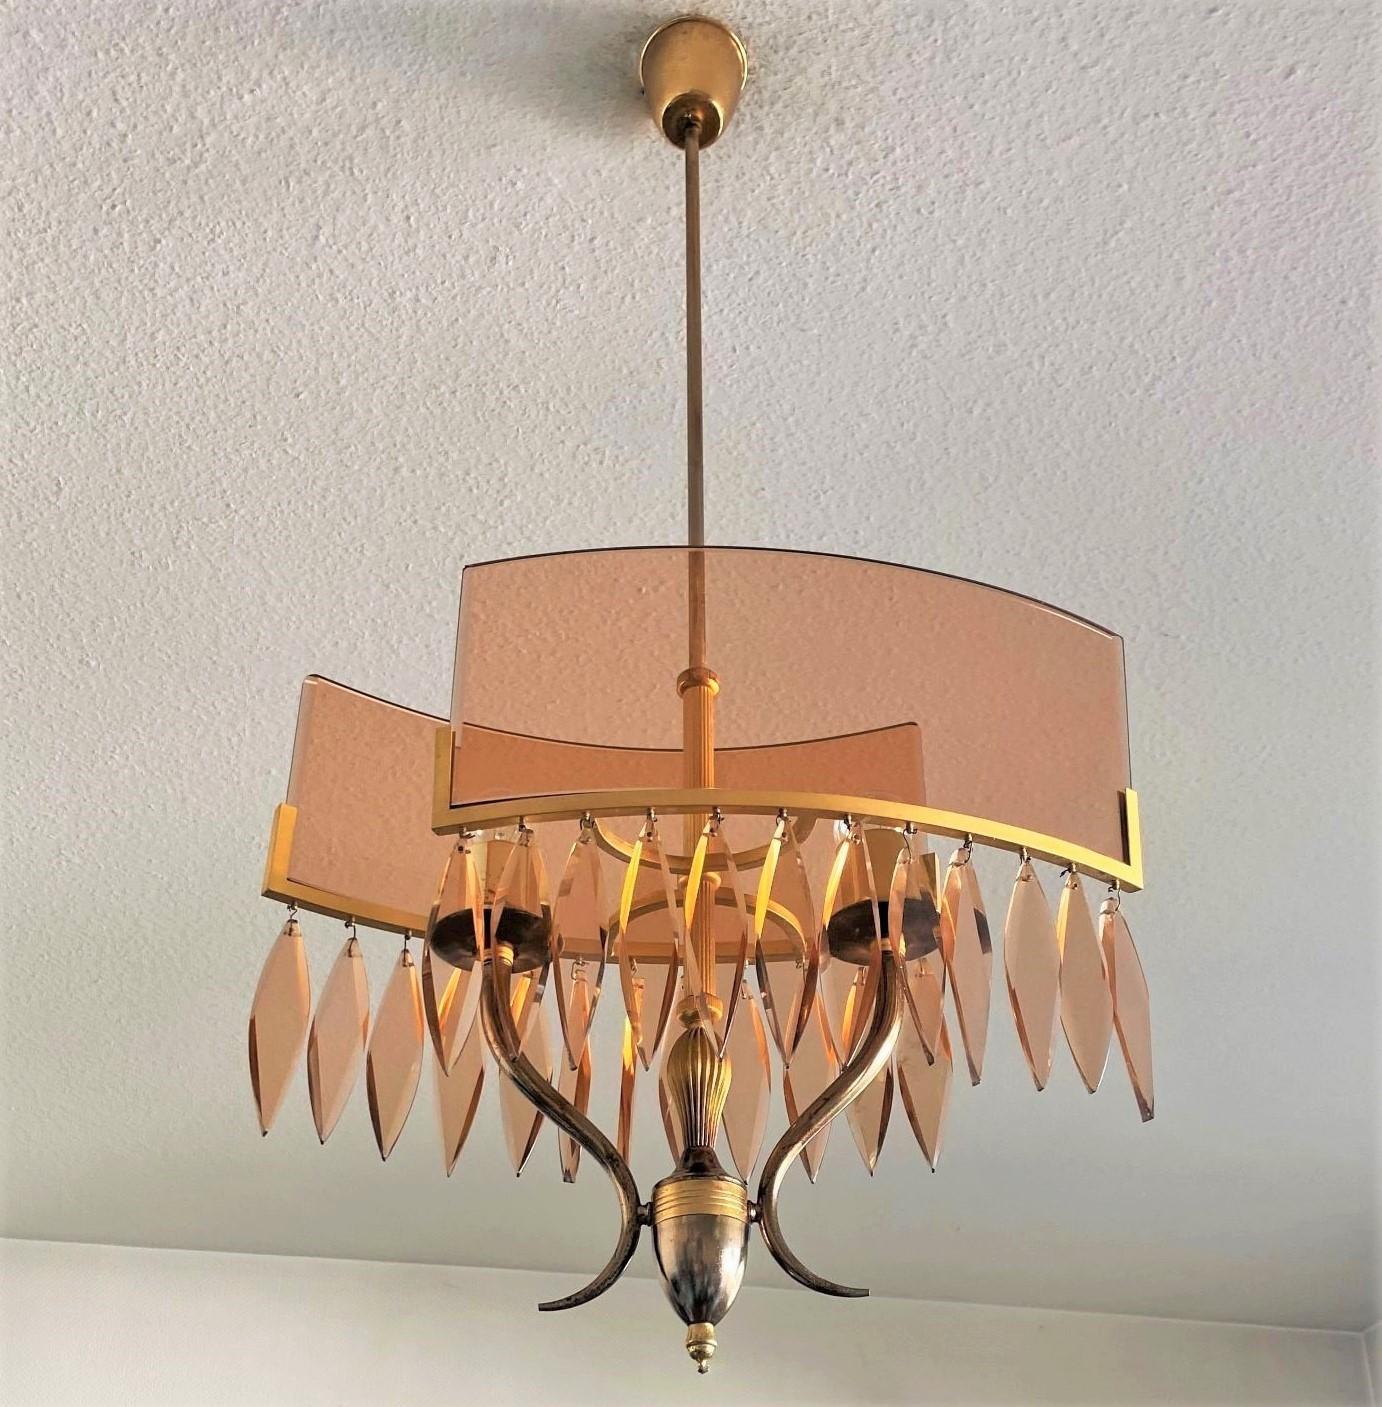 One of kind Fontana Arte horizontal chandelier designed and Manufactured in Italy, 1940s, atributed to Pietro Chiesa, one of the leading glass artists of Italian Art Deco, known for clean lines and modern design. Two bow shapped side panels and long